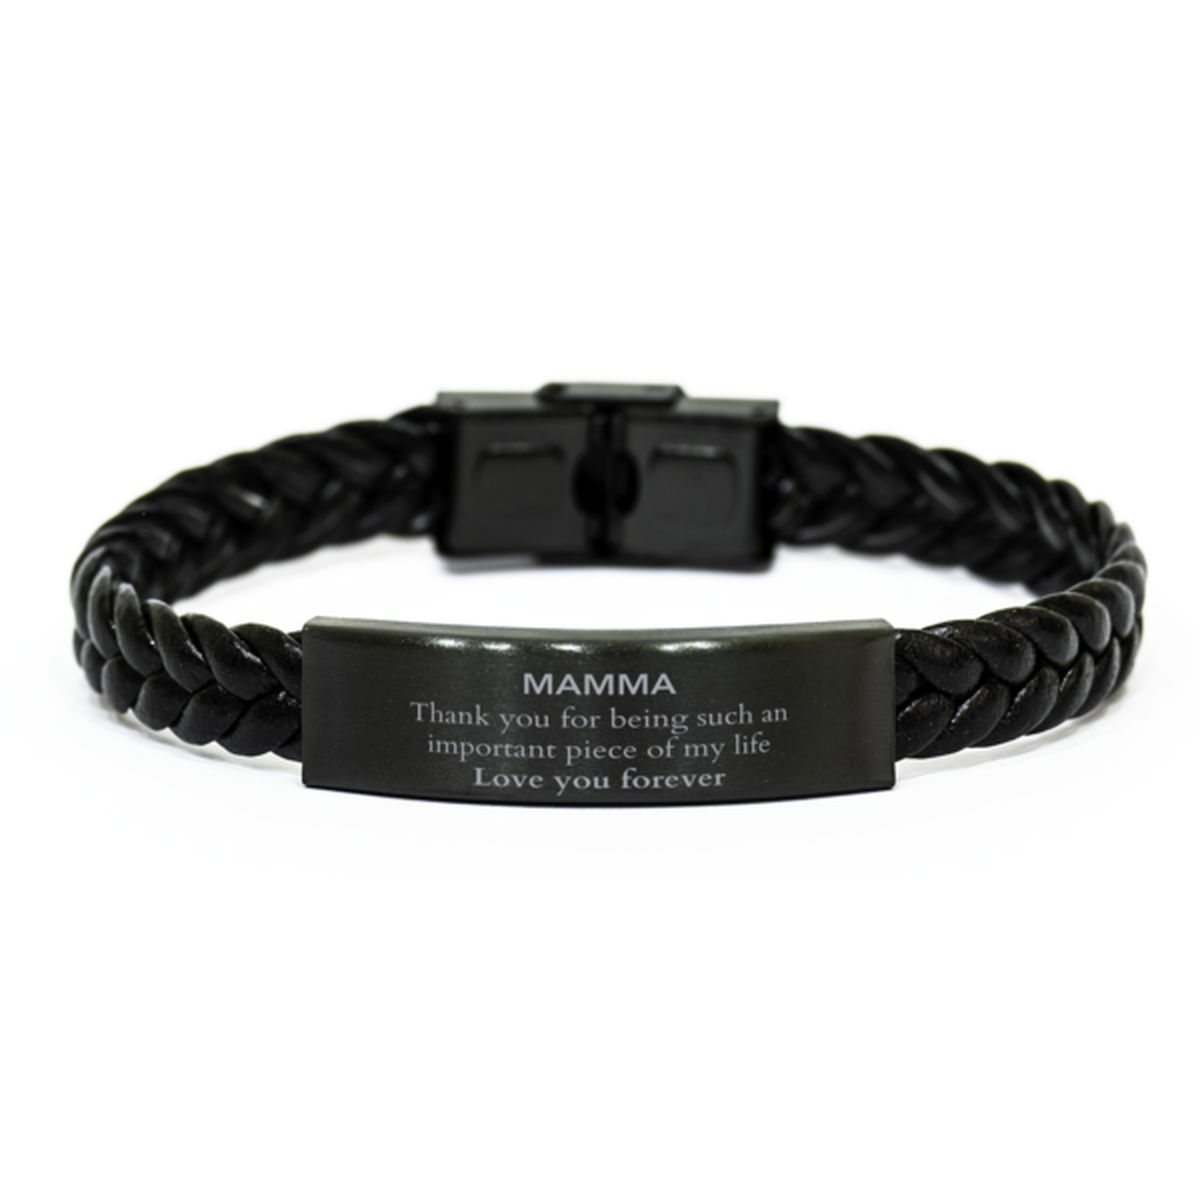 Appropriate Mamma Braided Leather Bracelet Epic Birthday Gifts for Mamma Thank you for being such an important piece of my life Mamma Christmas Mothers Fathers Day